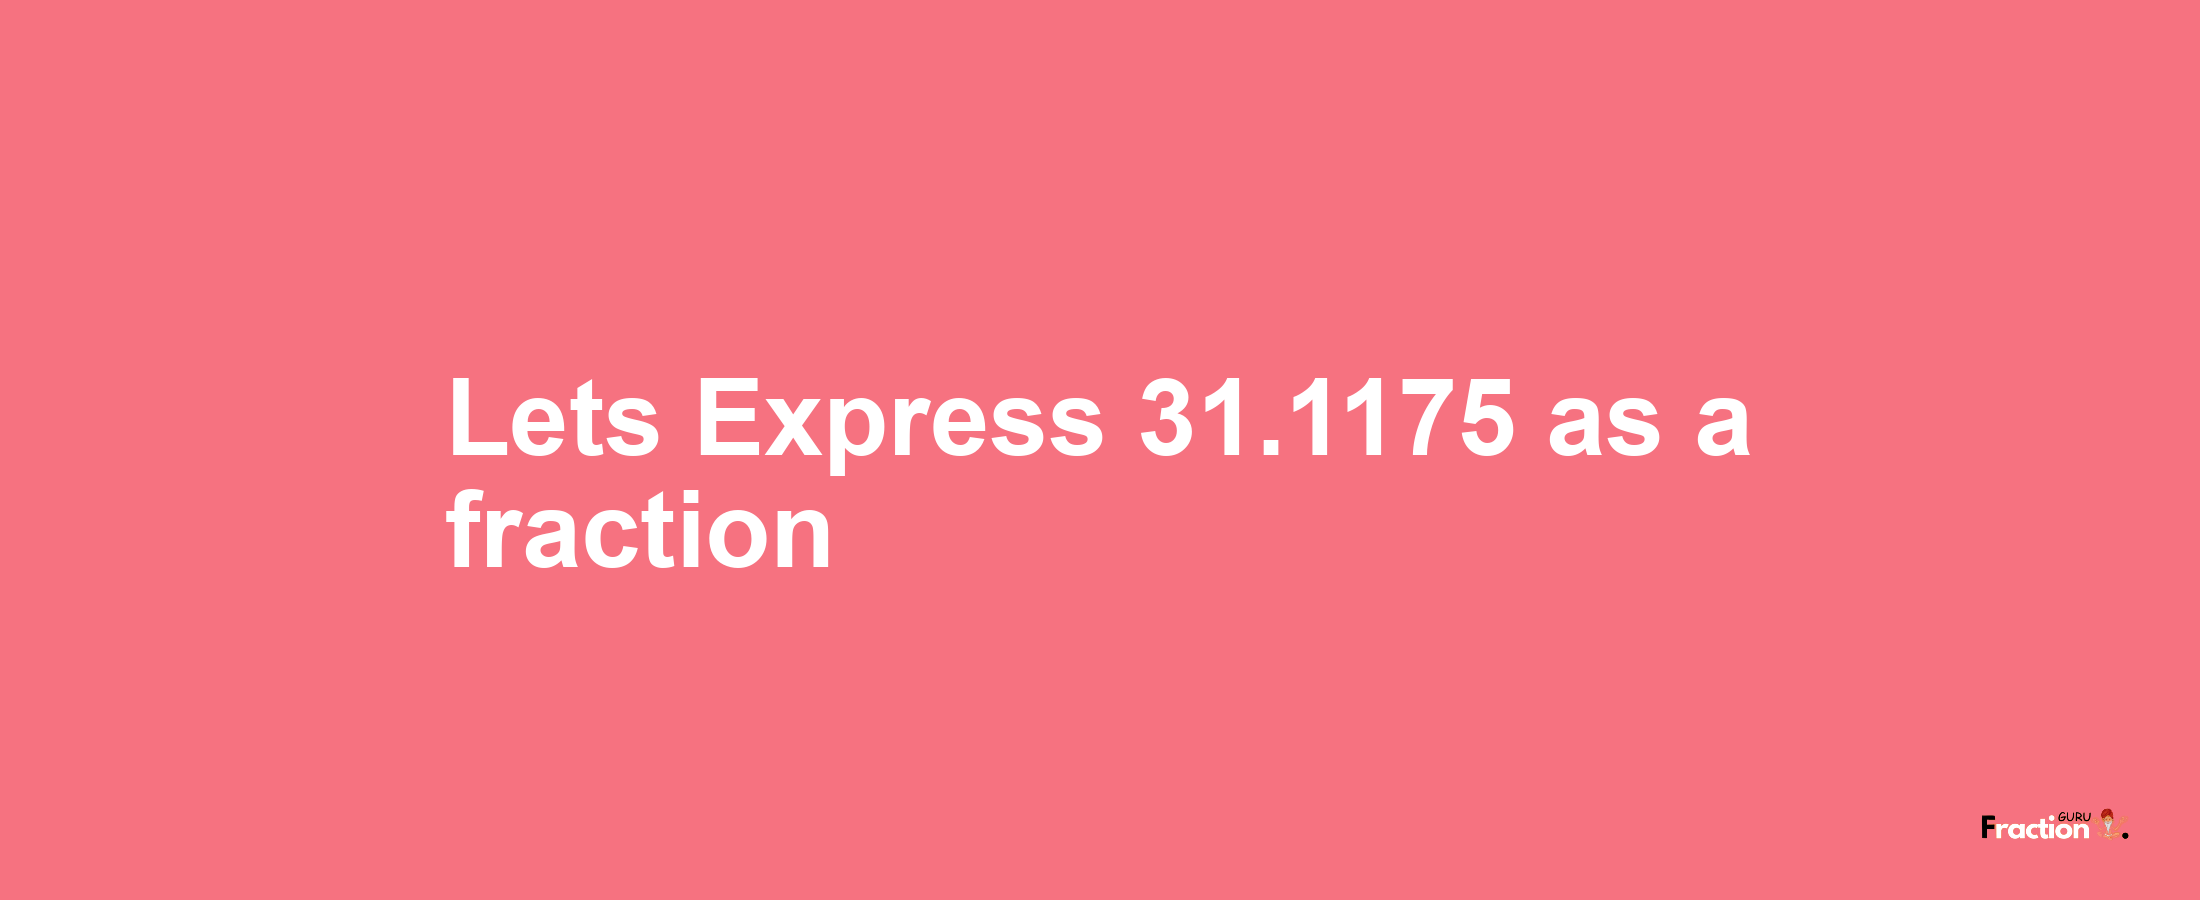 Lets Express 31.1175 as afraction